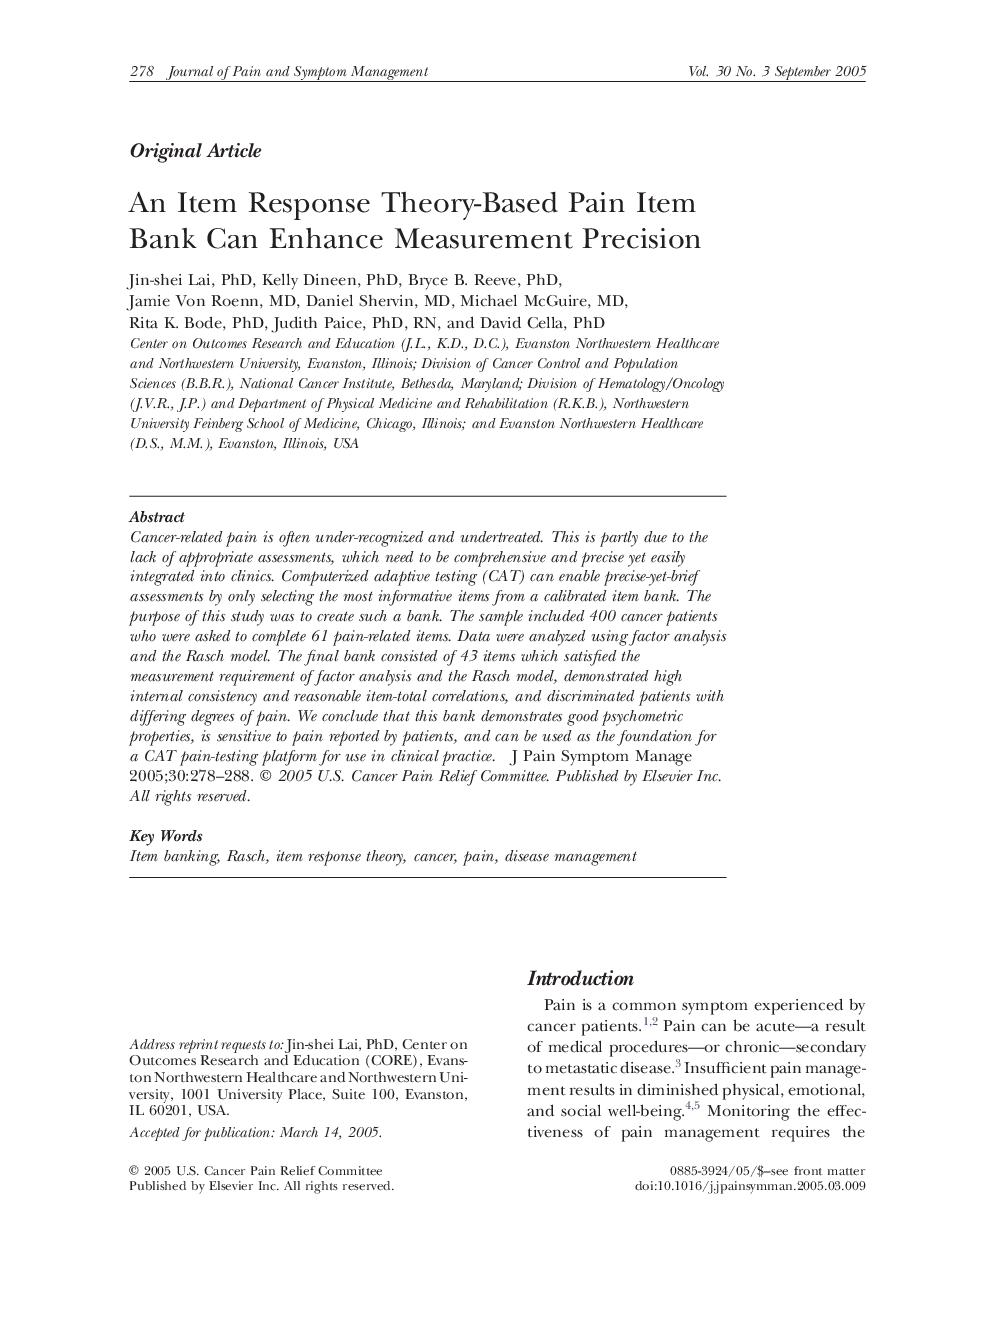 An Item Response Theory-Based Pain Item Bank Can Enhance Measurement Precision